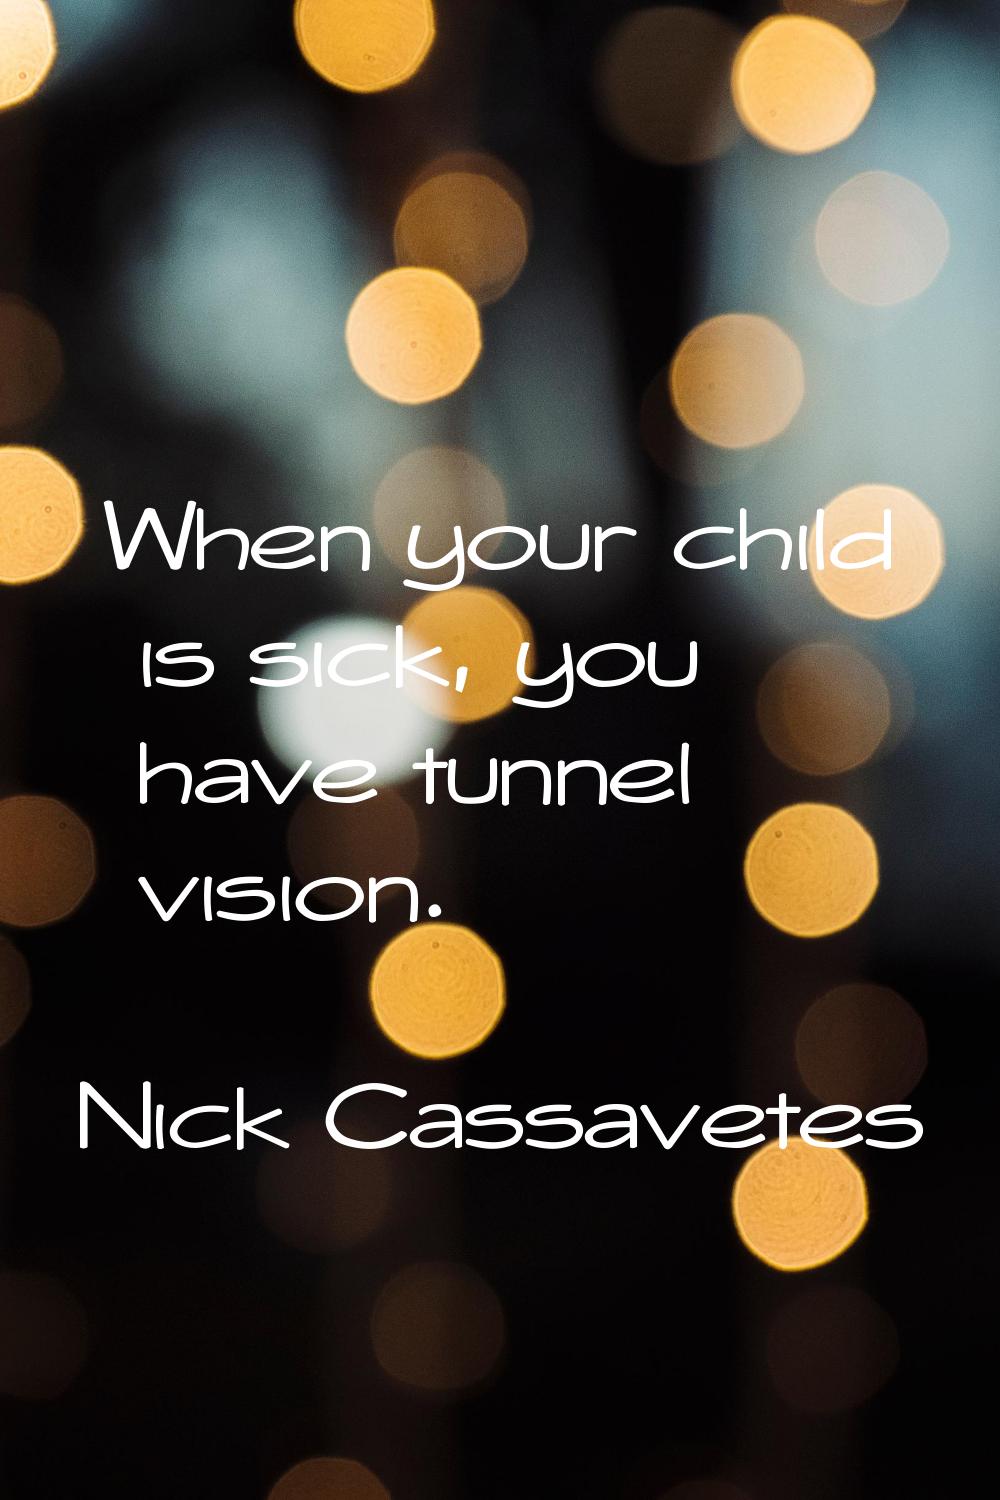 When your child is sick, you have tunnel vision.